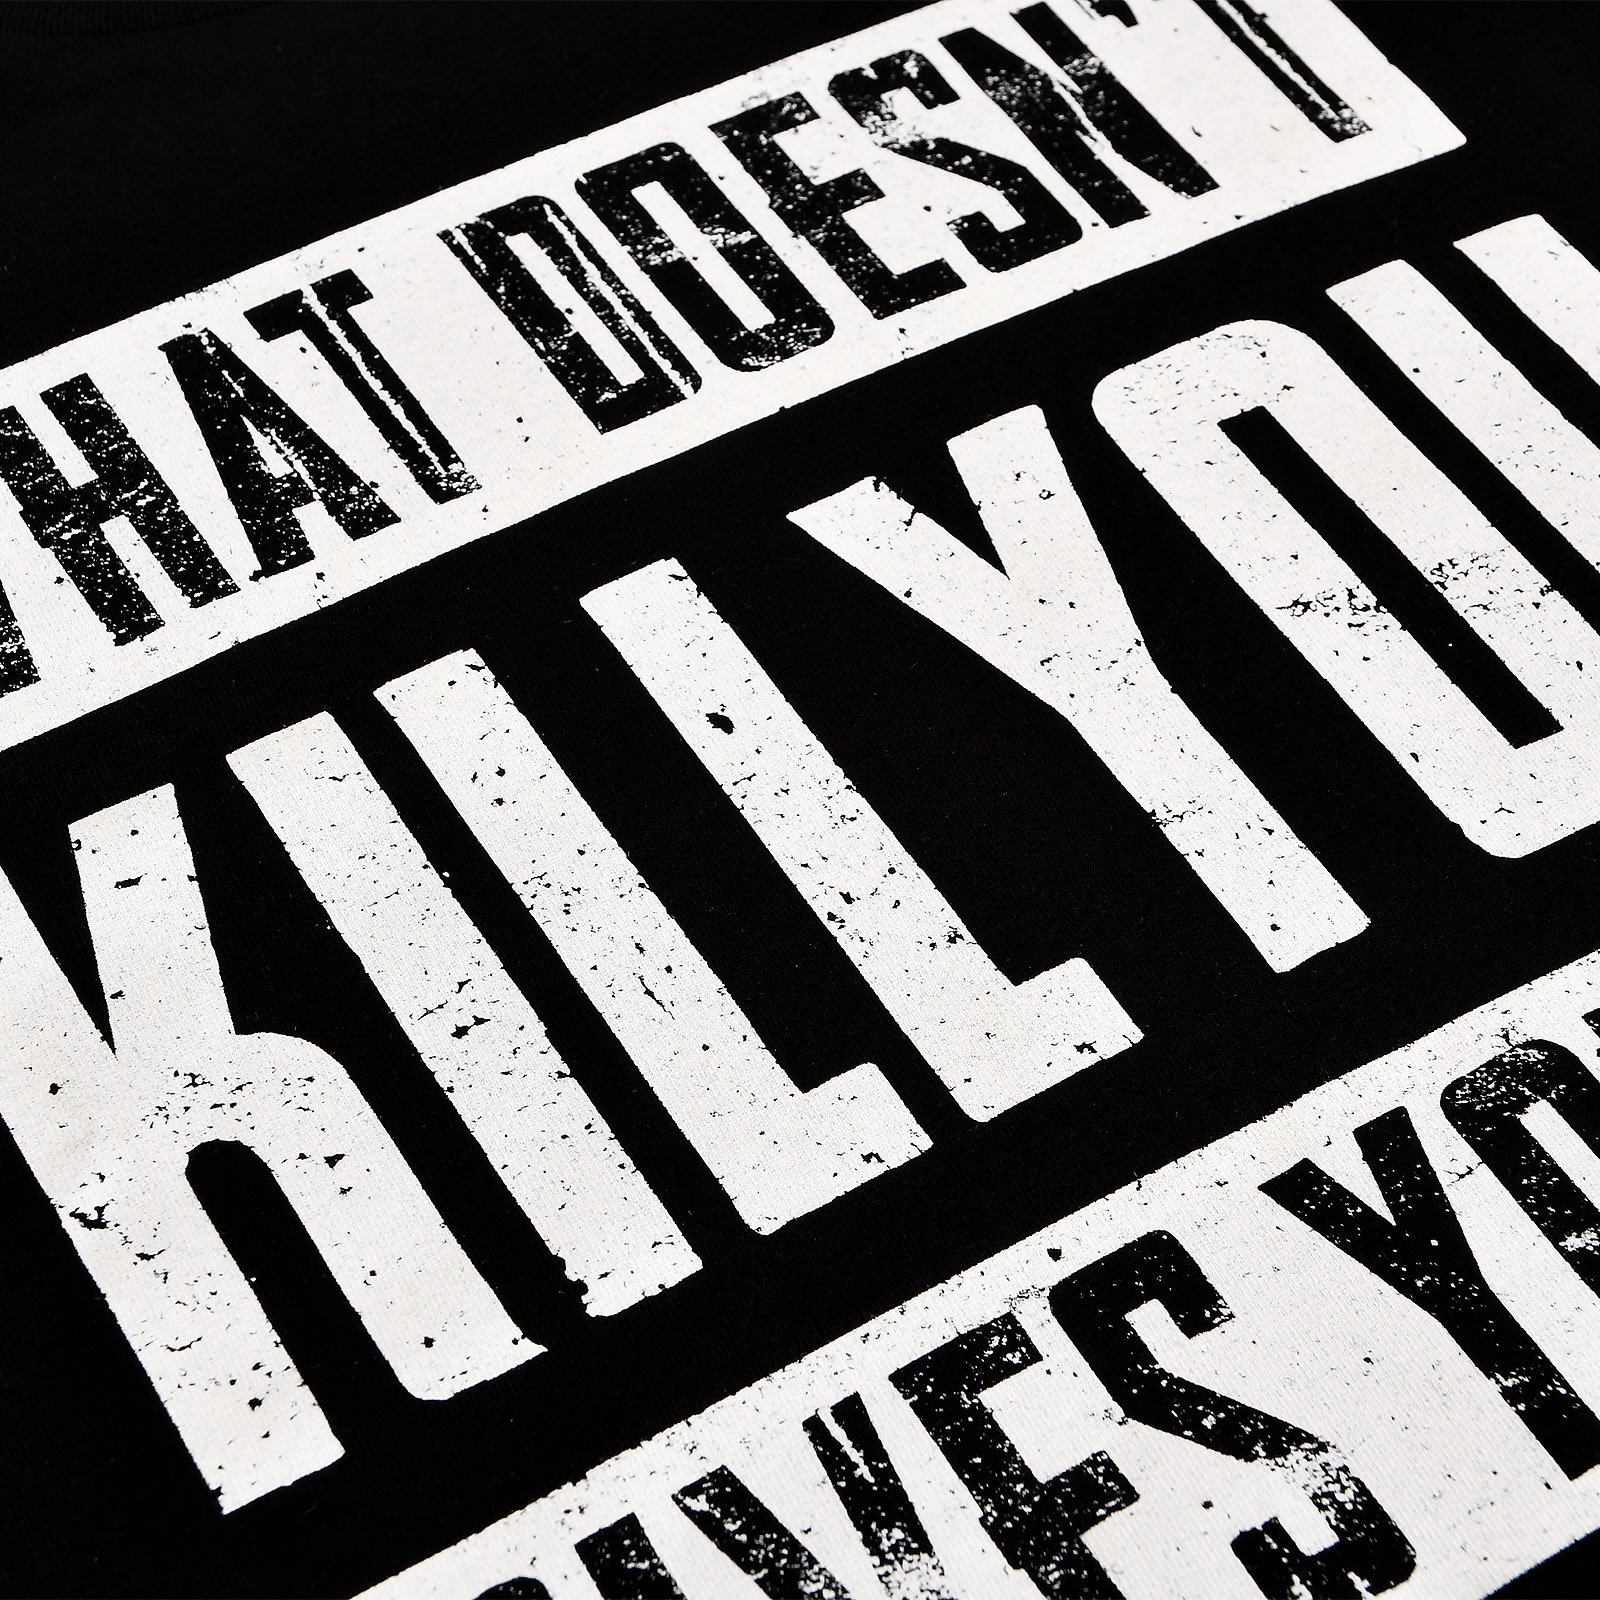 What Doesn't Kill You Gives You XP T-Shirt schwarz